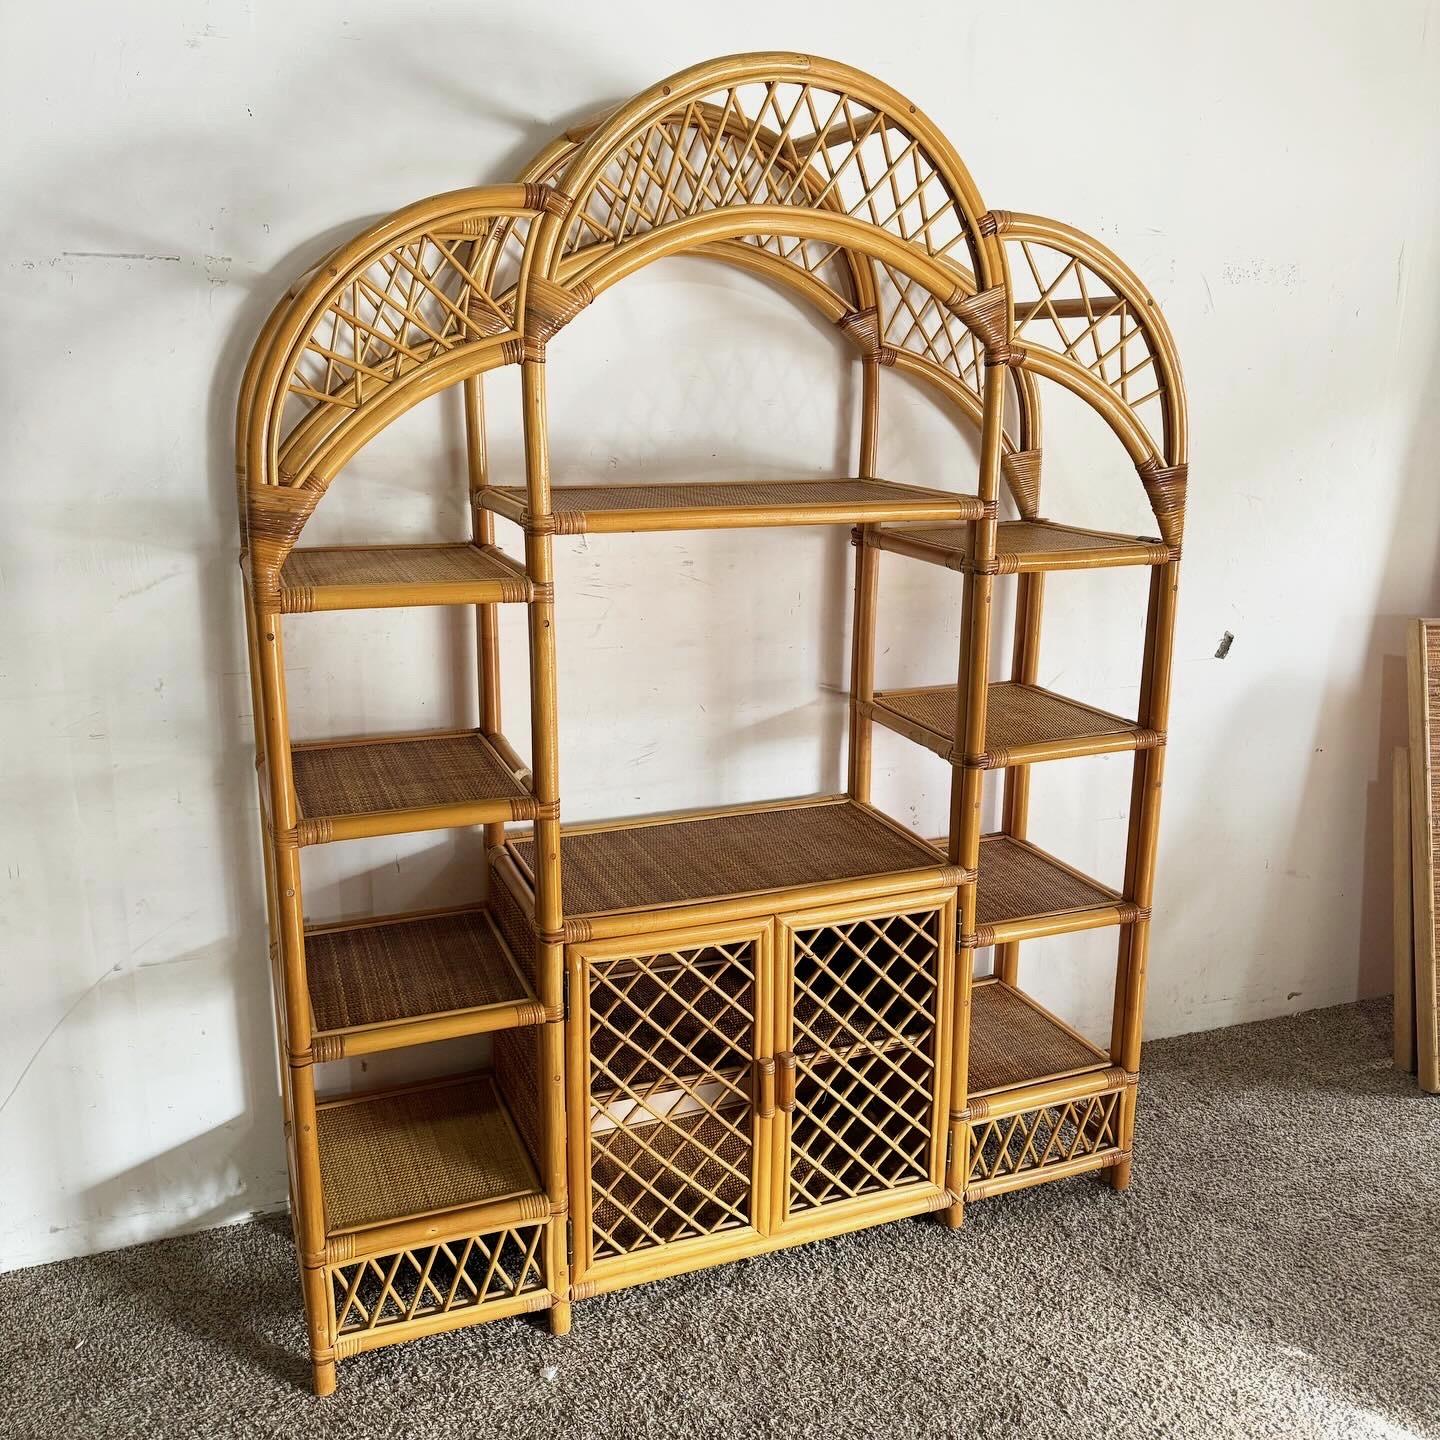 Embrace the natural charm of this Boho Chic Arched Bamboo Rattan and Wicker Etagere. Its architectural arched top and blend of bamboo, rattan, and wicker create a stunning display piece. Offering multiple shelves for books, plants, or decor, it's